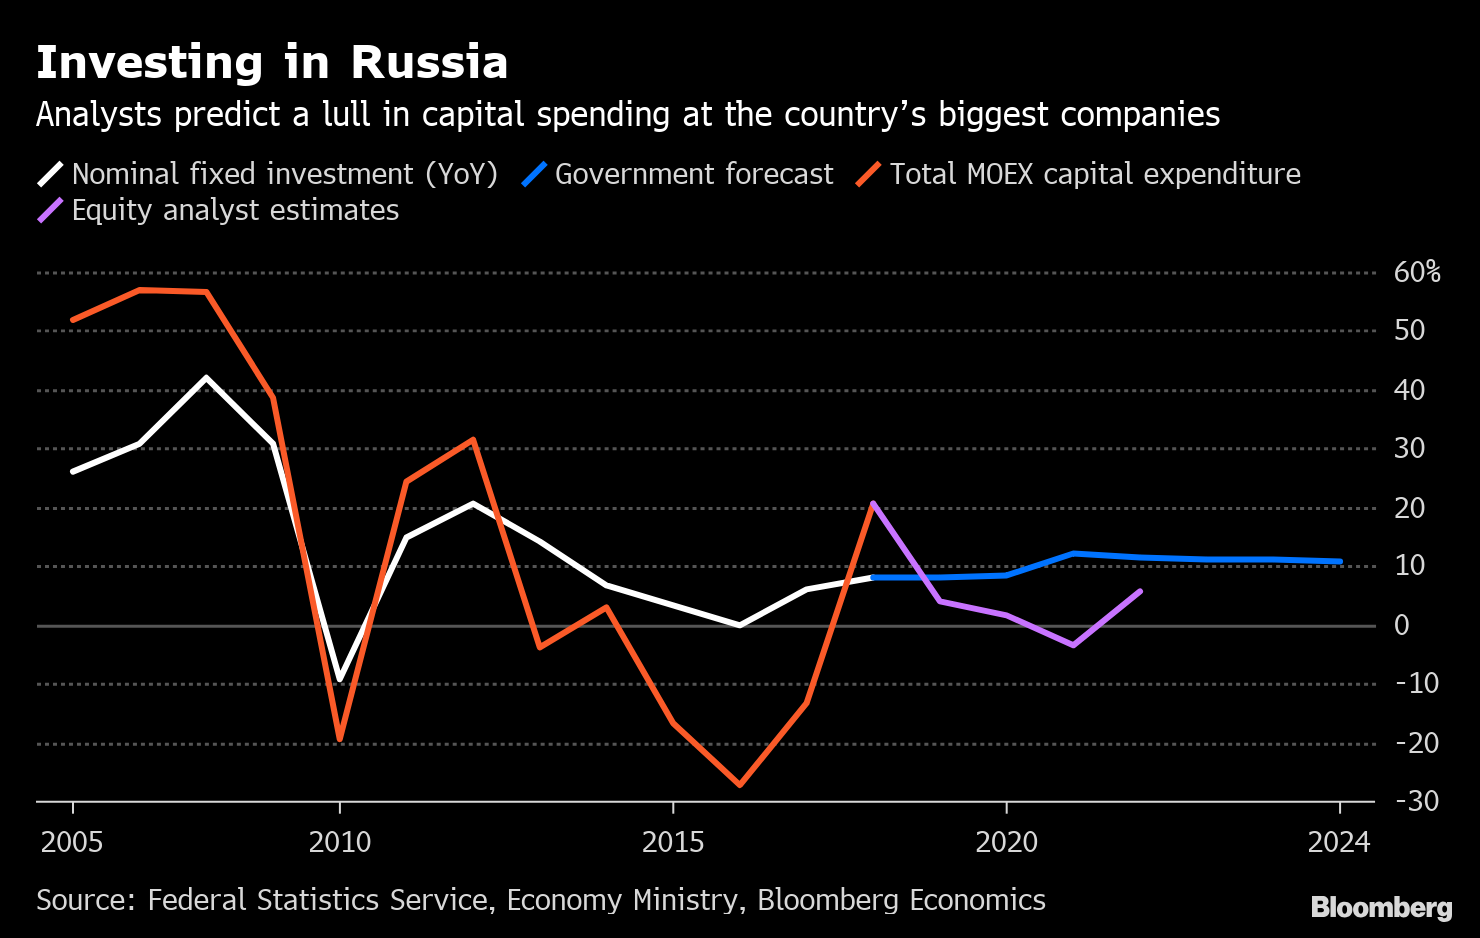 Wagner & Experts - Why invest in Russia now